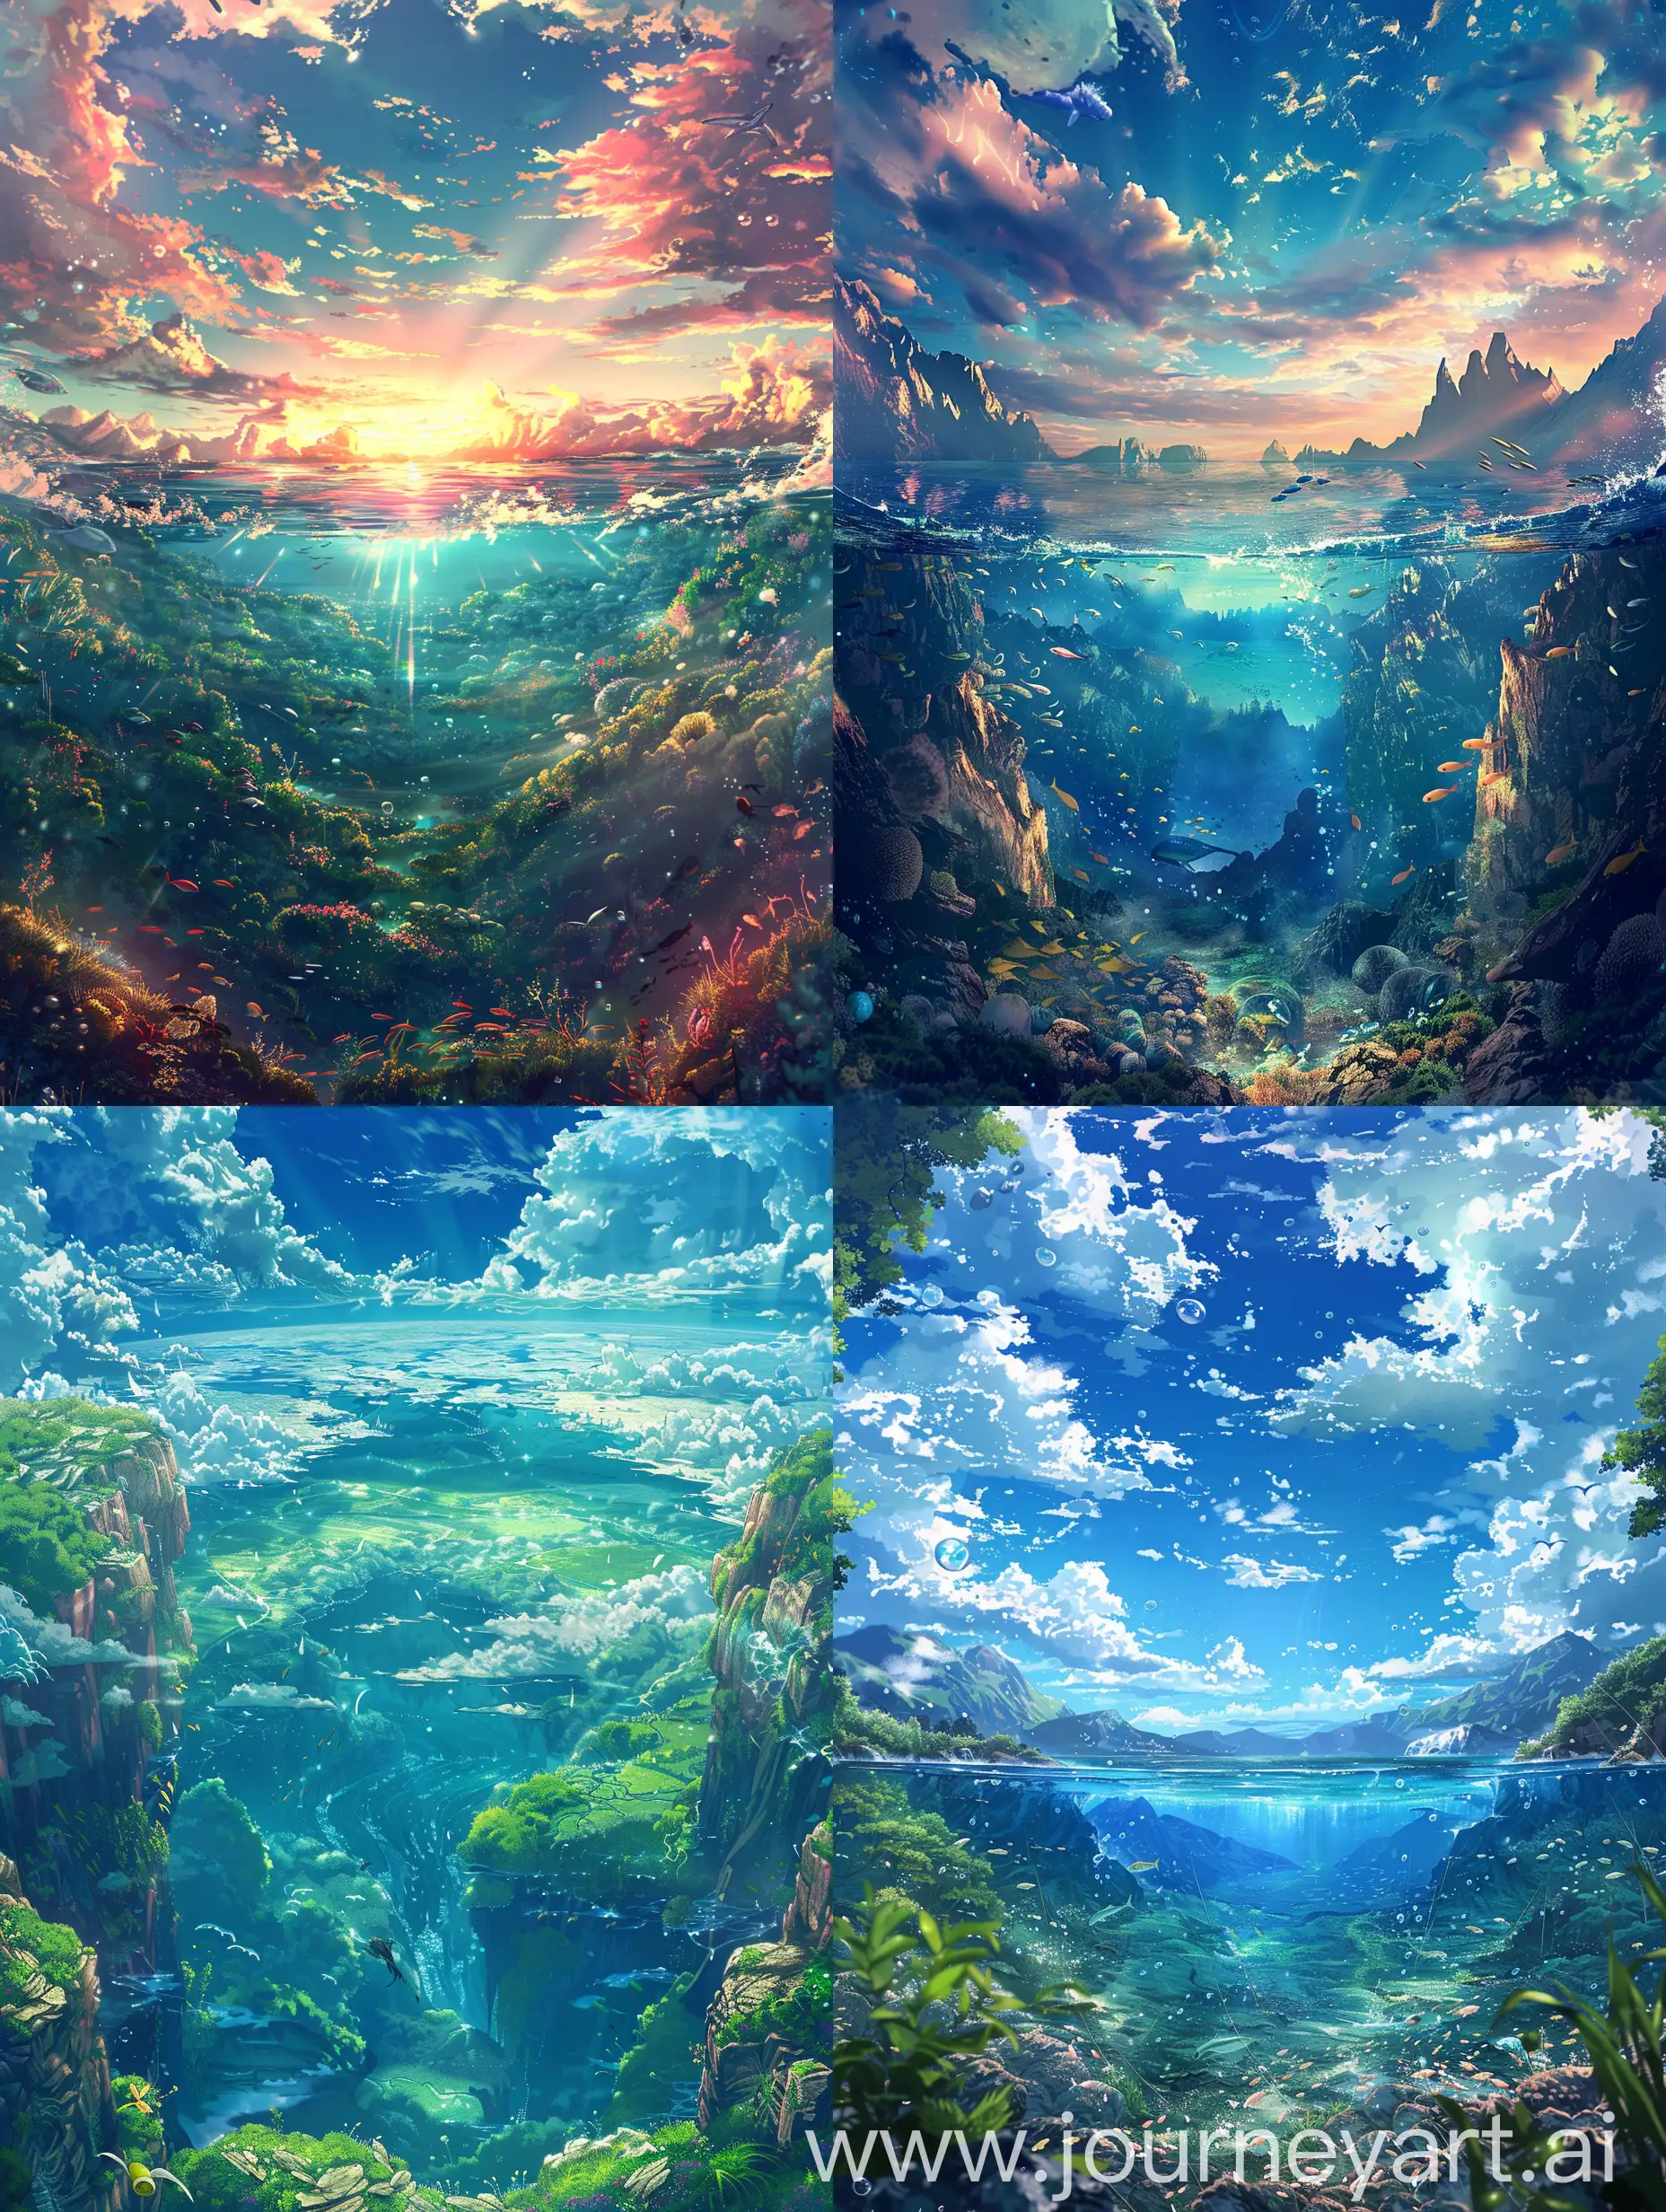  anime style,beautiful textures,vast  view of a magical water sky,including water life,out of this world image,a view from mountain,best photography style,a sense of wonder.